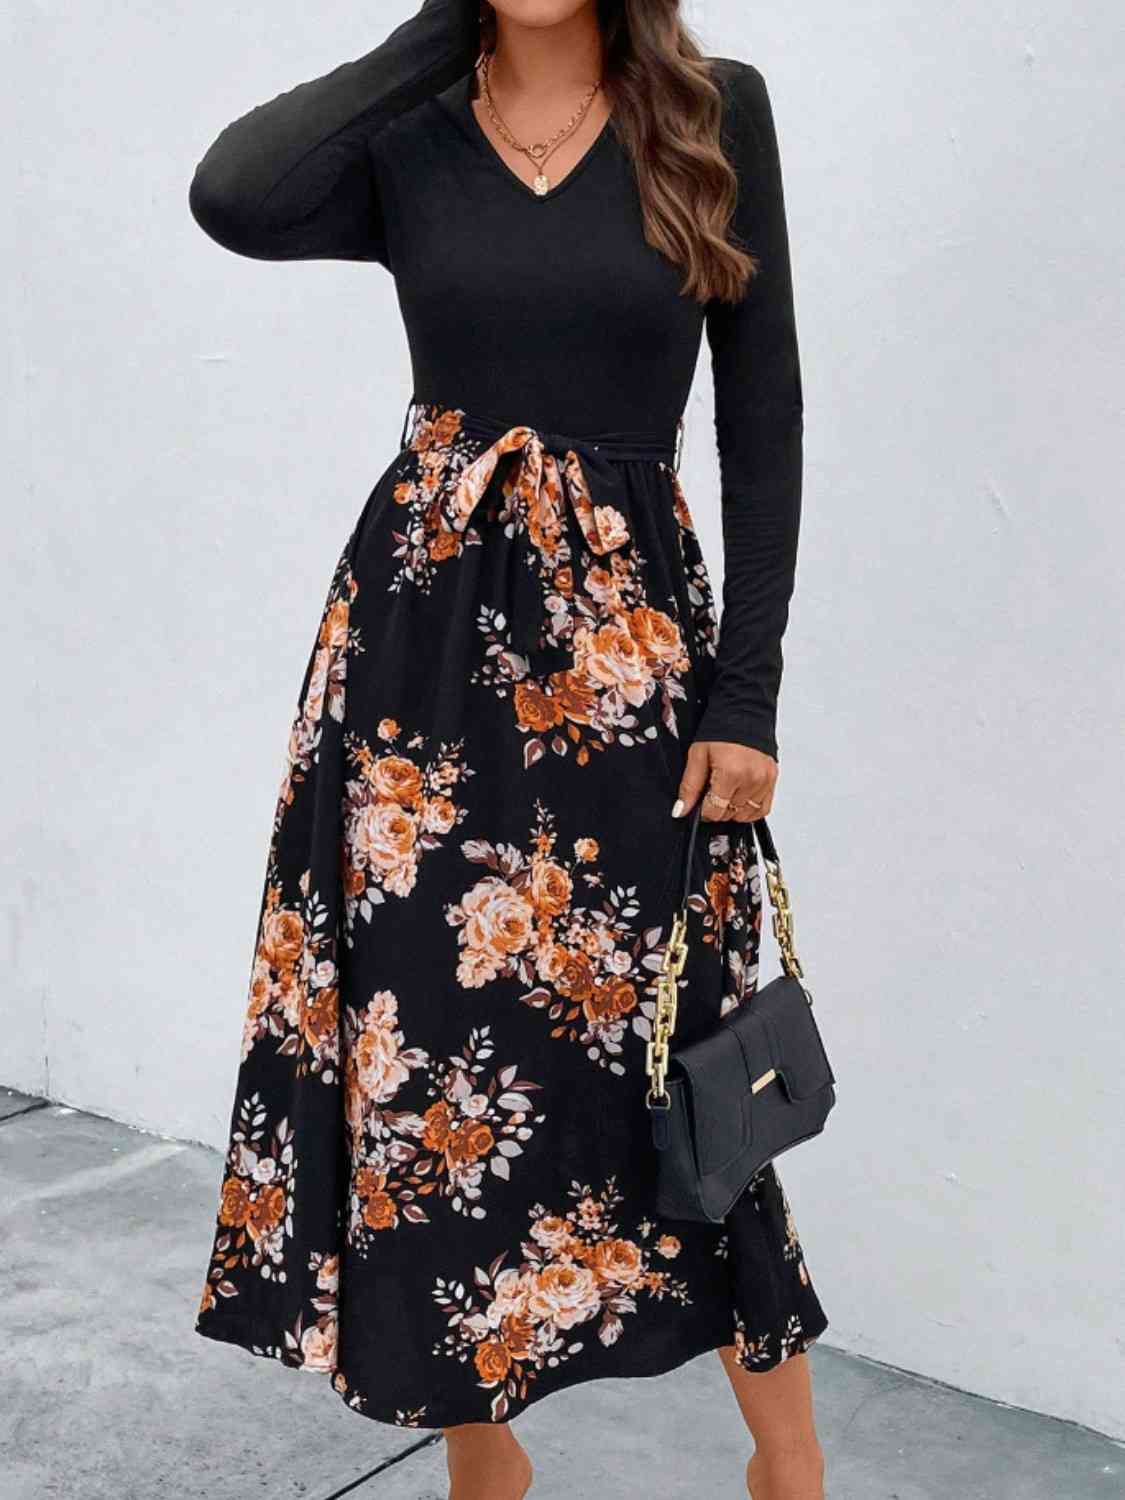 Floral V-Neck Long Sleeve Dress - Kawaii Stop - Classic Style, Fashion Forward, Floral Pattern, Heeled Ankle Boots, Individual Style, Opaque Fabric, Polyester Blend, S&M&Y, Ship From Overseas, Sophisticated Dress, Statement Belt, Stylish Look, Timeless Beauty, Unique Dress, Uniquely Elegant, V-Neck Design, Women's Fashion